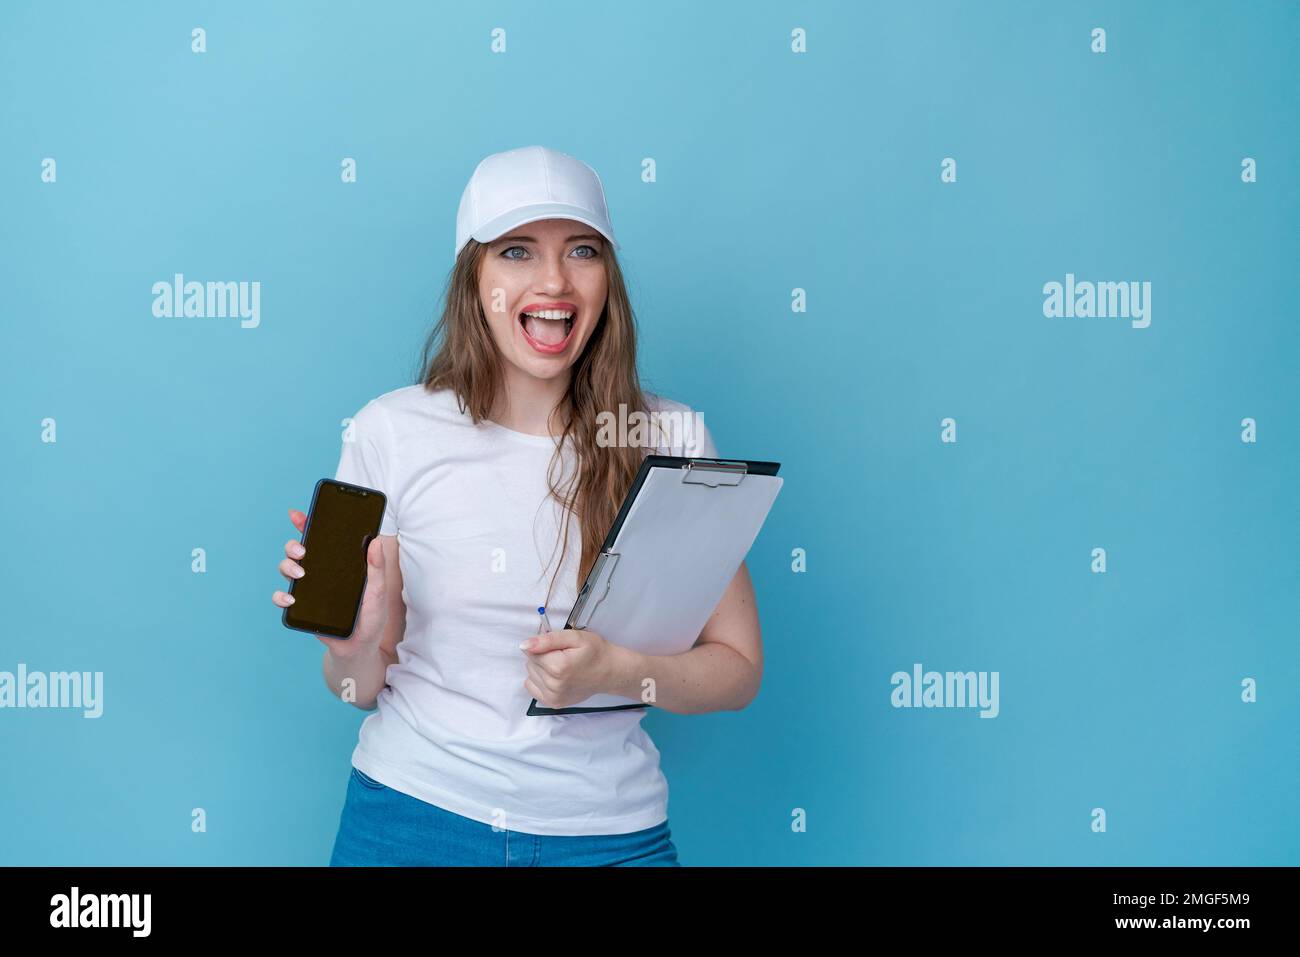 Call center service concept customer support or sales agent. Business woman, caller, telephone operator consultant, holding survey papers in white t-shirt and cap for mockup on blue studio background Stock Photo